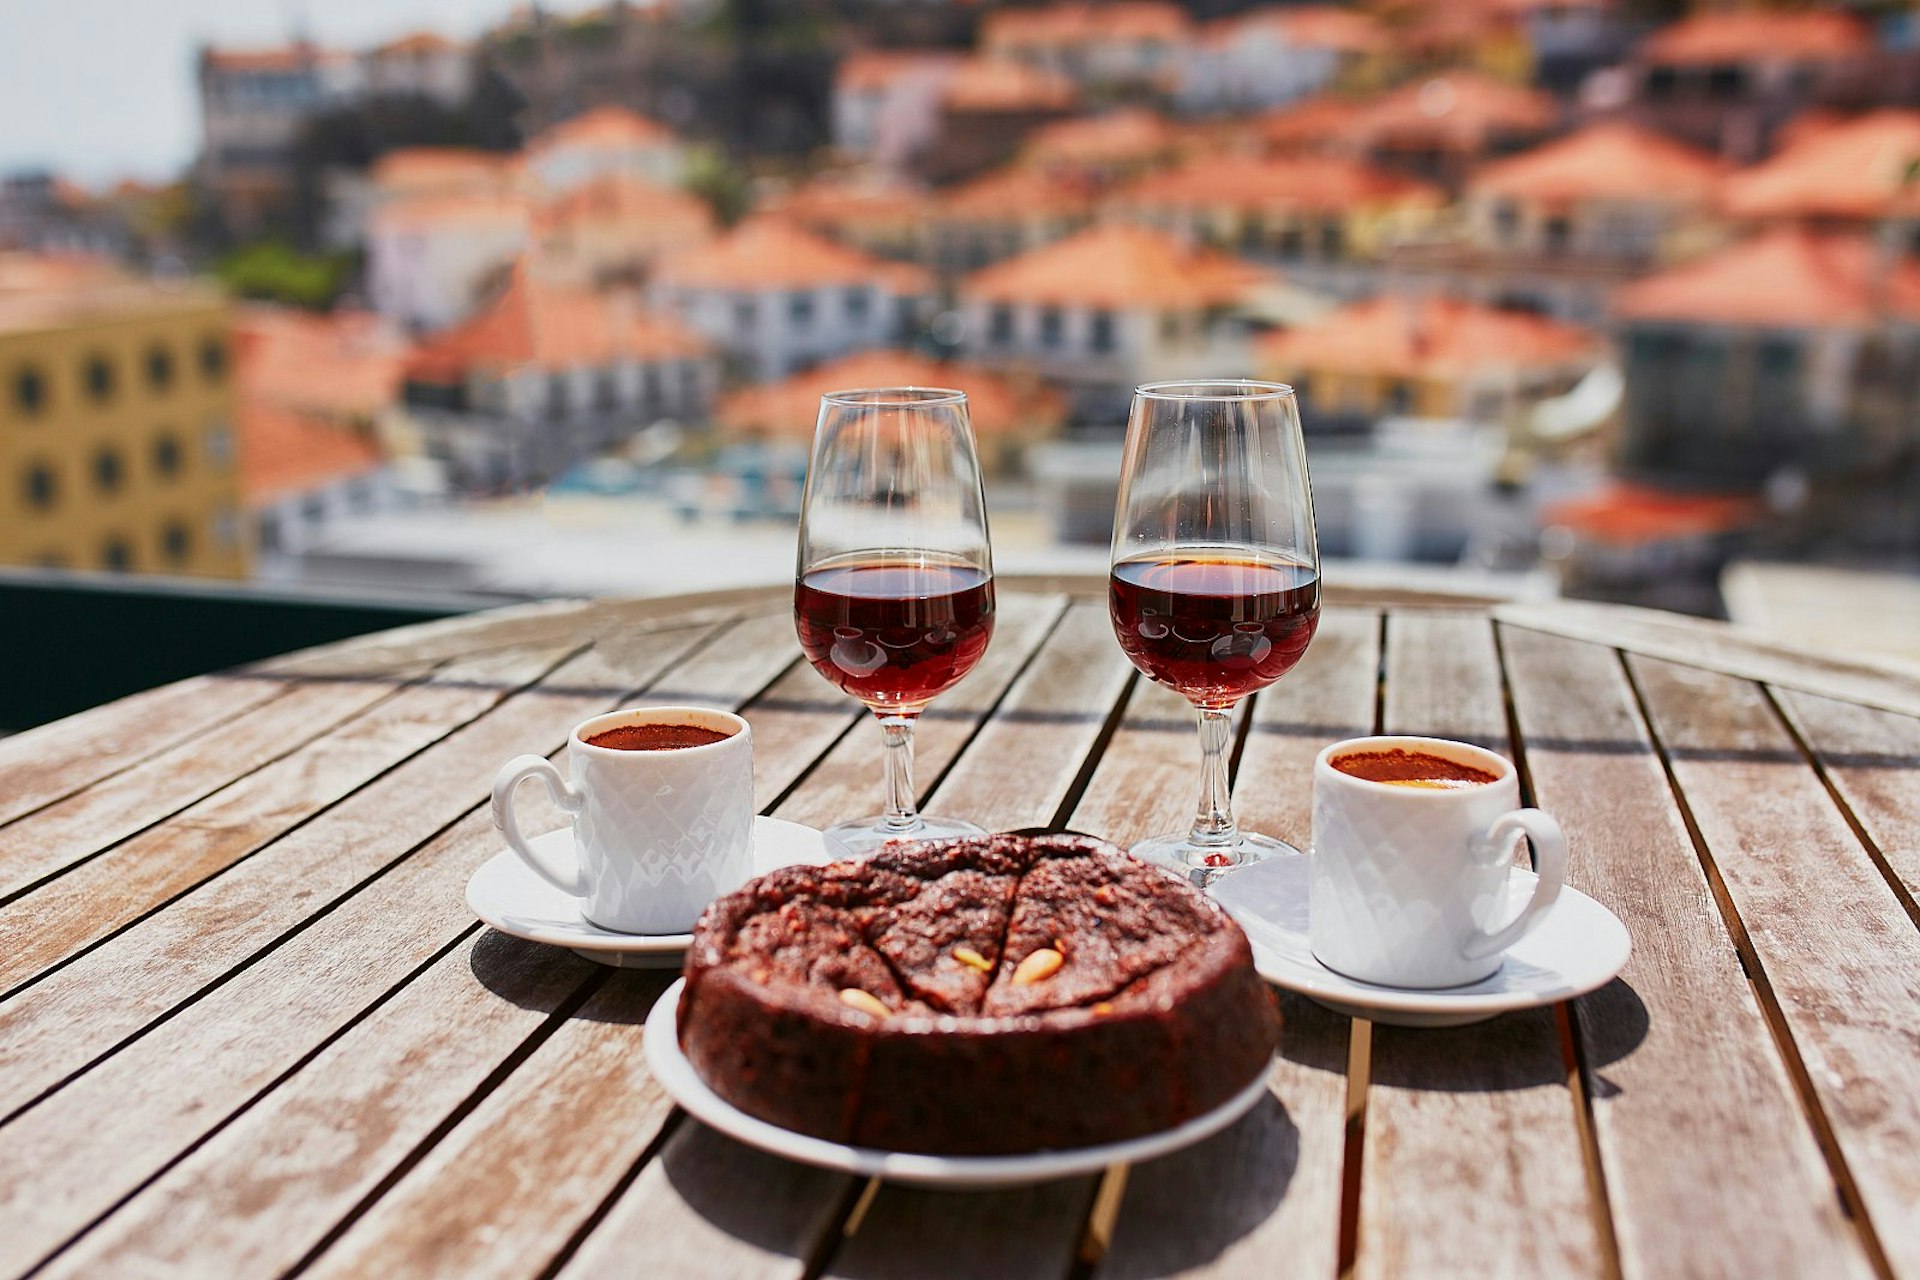 Two glasses of Madeira wine, two cups of espresso coffee and a traditional Portuguese honey and nut cake bolo de mel sit on a wooden tabletop with a view beyond of the blurred terracotta orange roofs of Funchal.